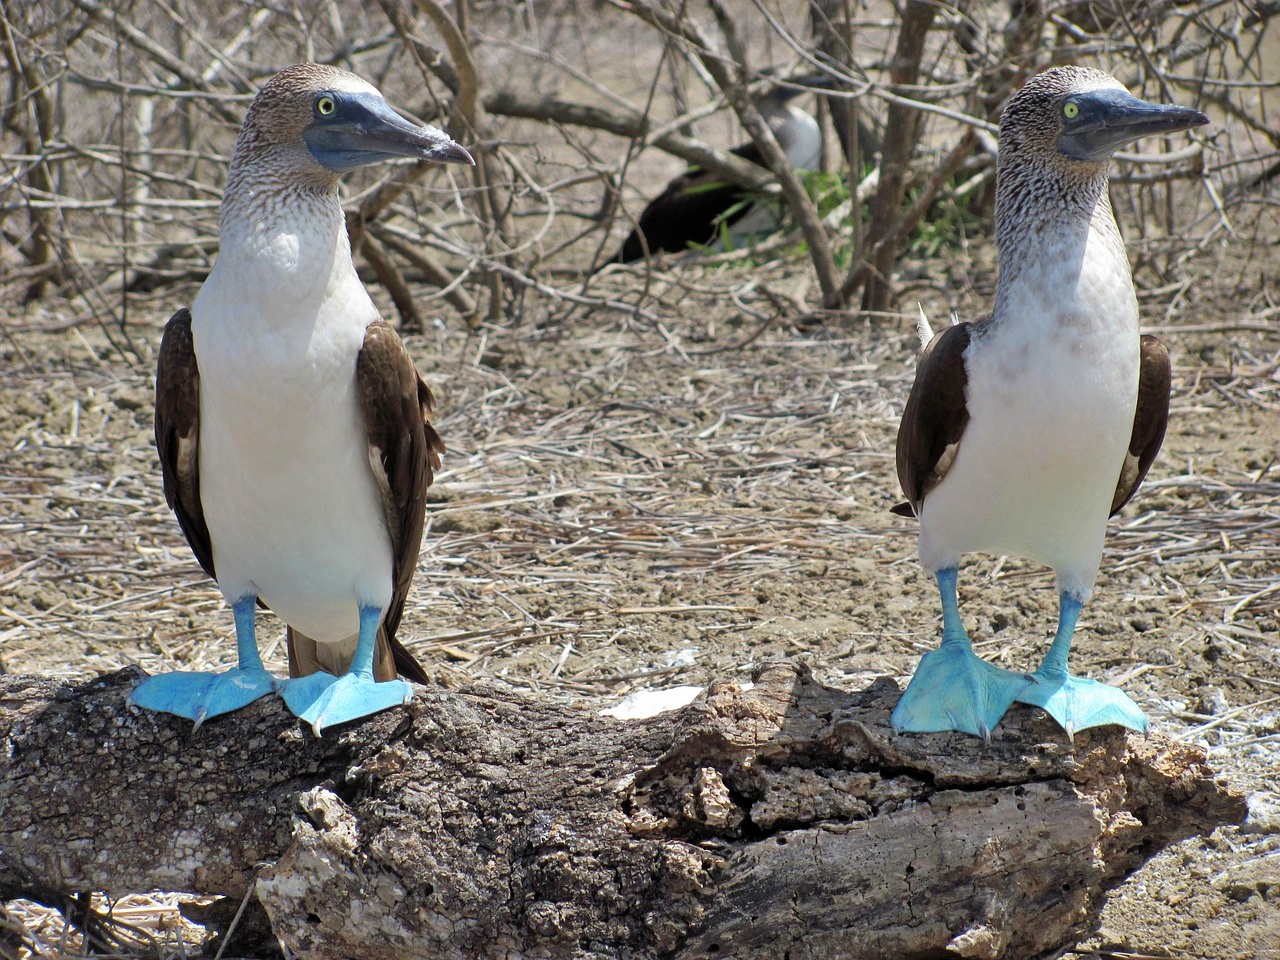 Blue-footed Booby in the Mariettas Islands